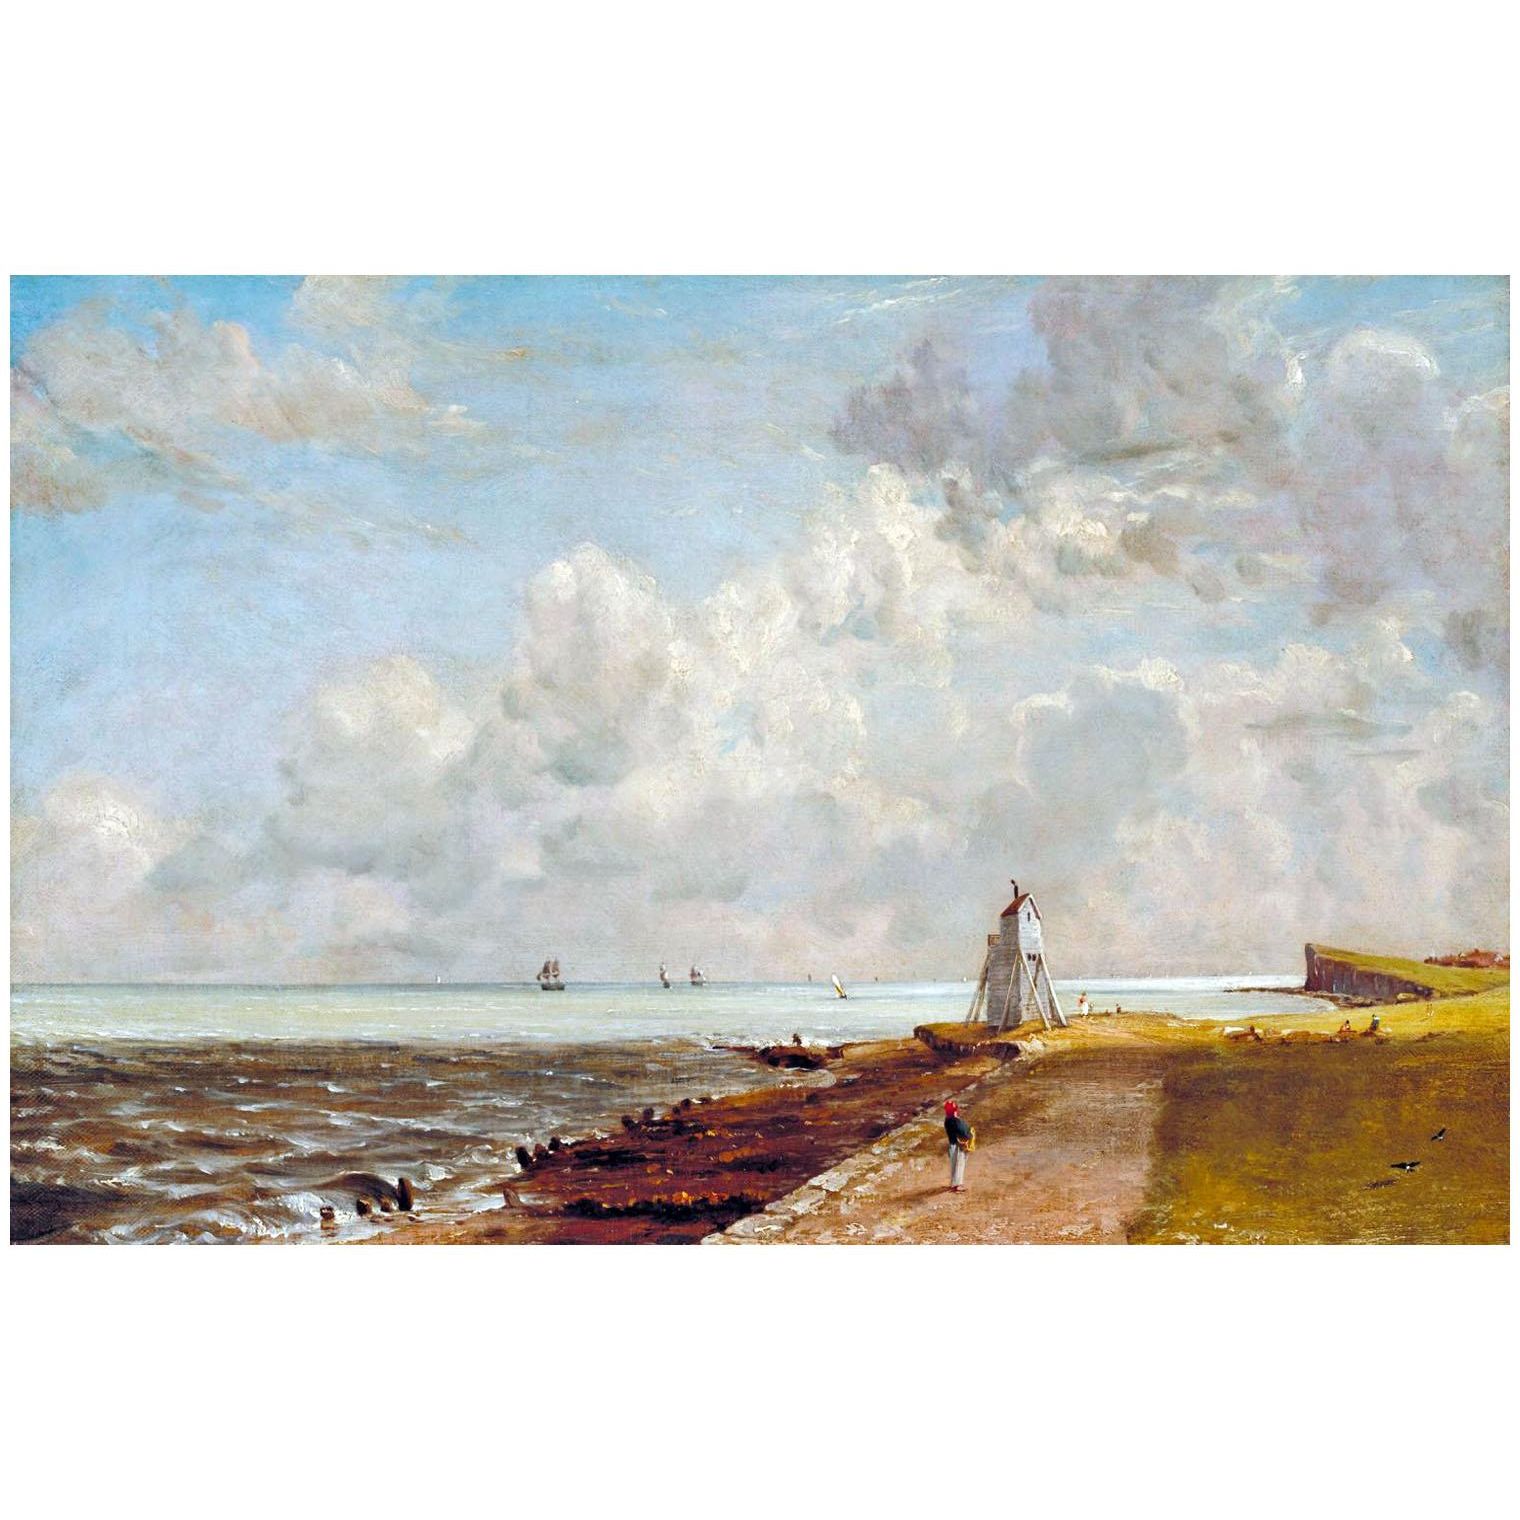 John Constable. Harwich Lighthouse. 1820. Tate Britain